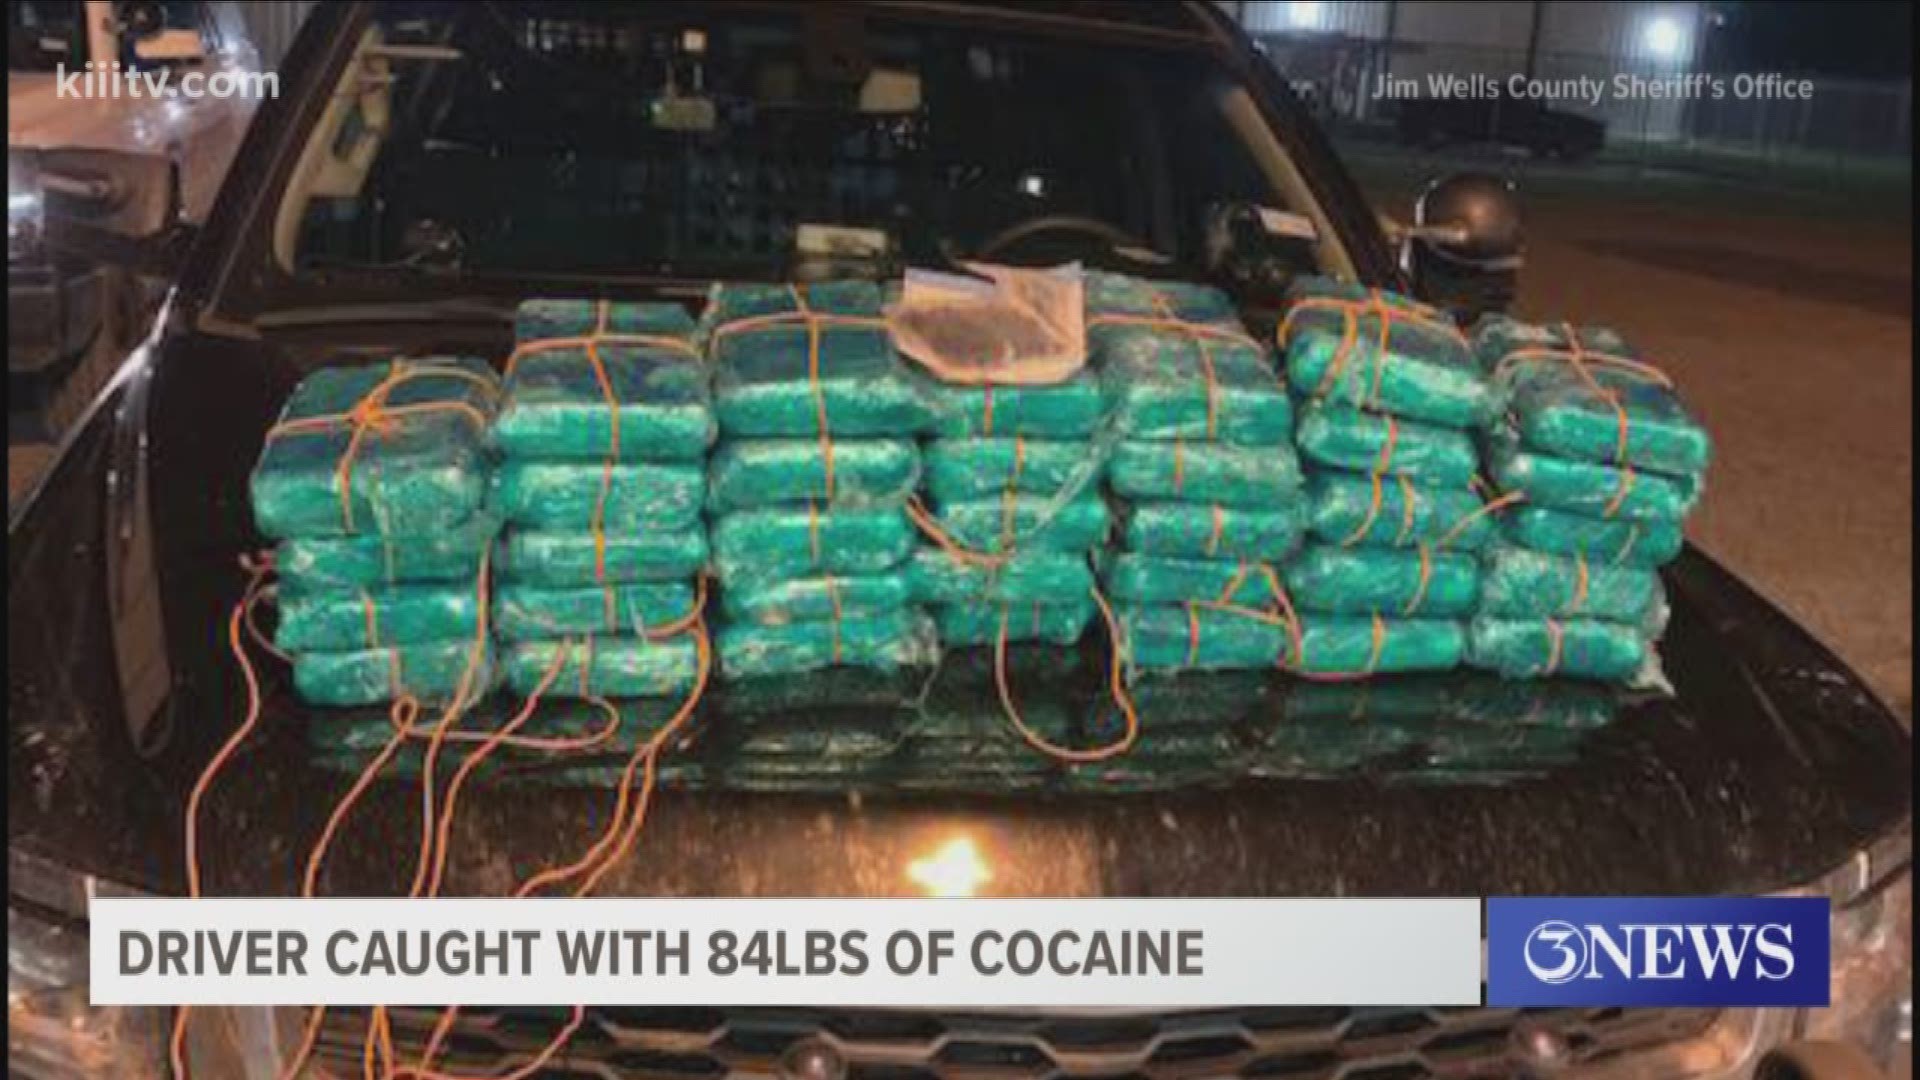 Dozens of pounds of cocaine were found over the weekend during a traffic stop.